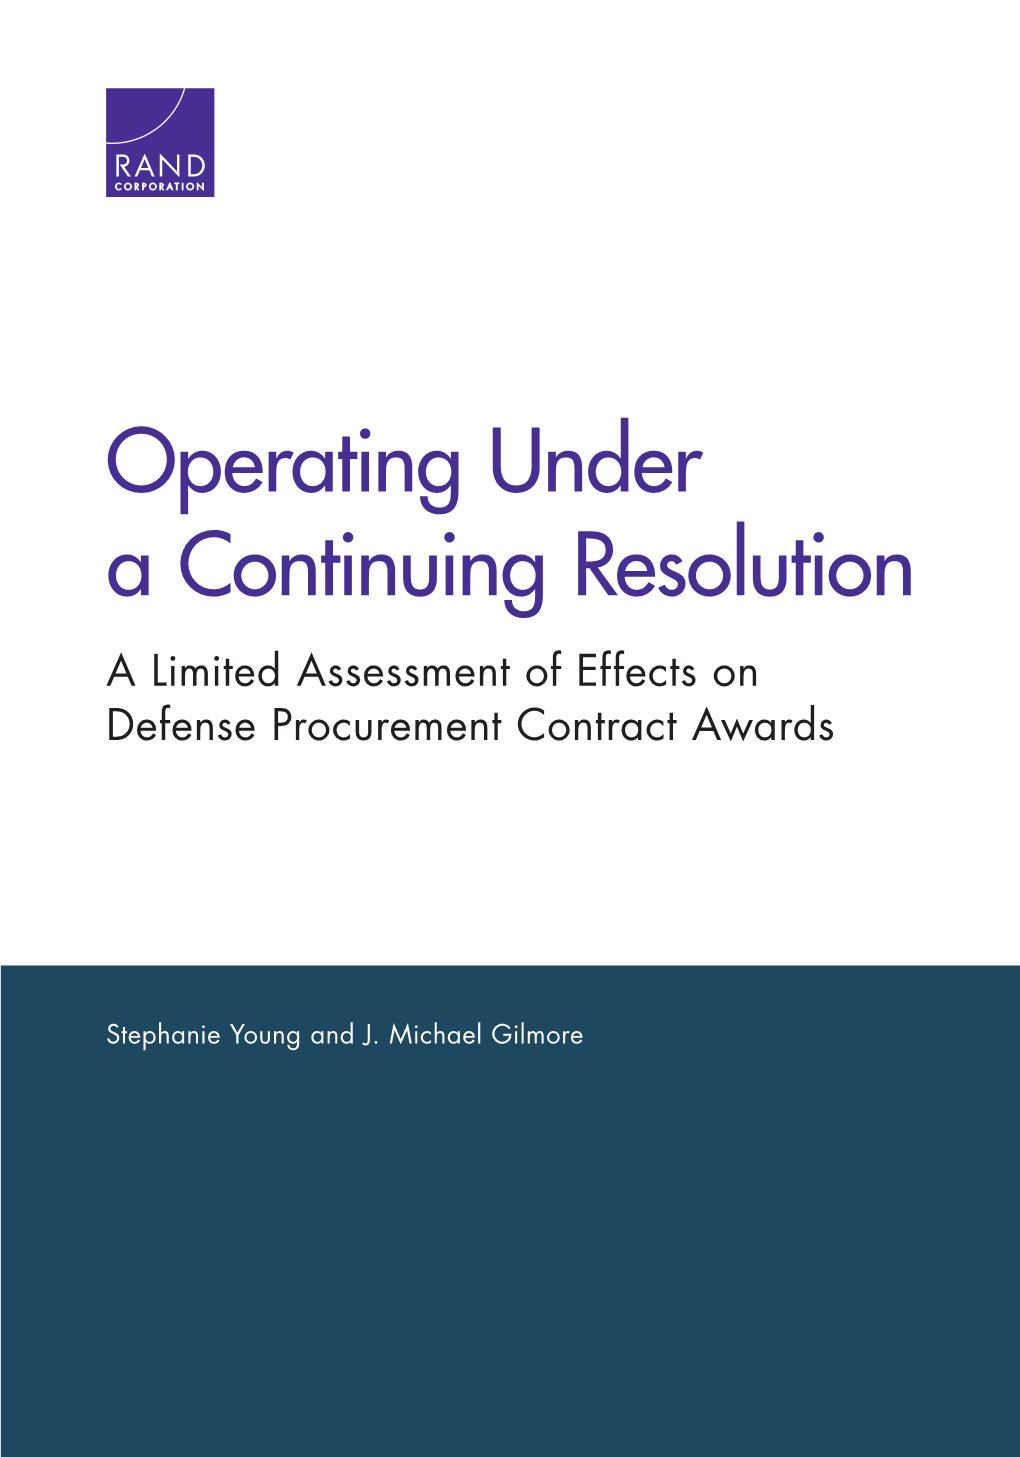 Operating Under a Continuing Resolution: a Limited Assessment of Effects on Defense Procurement Contract Awards